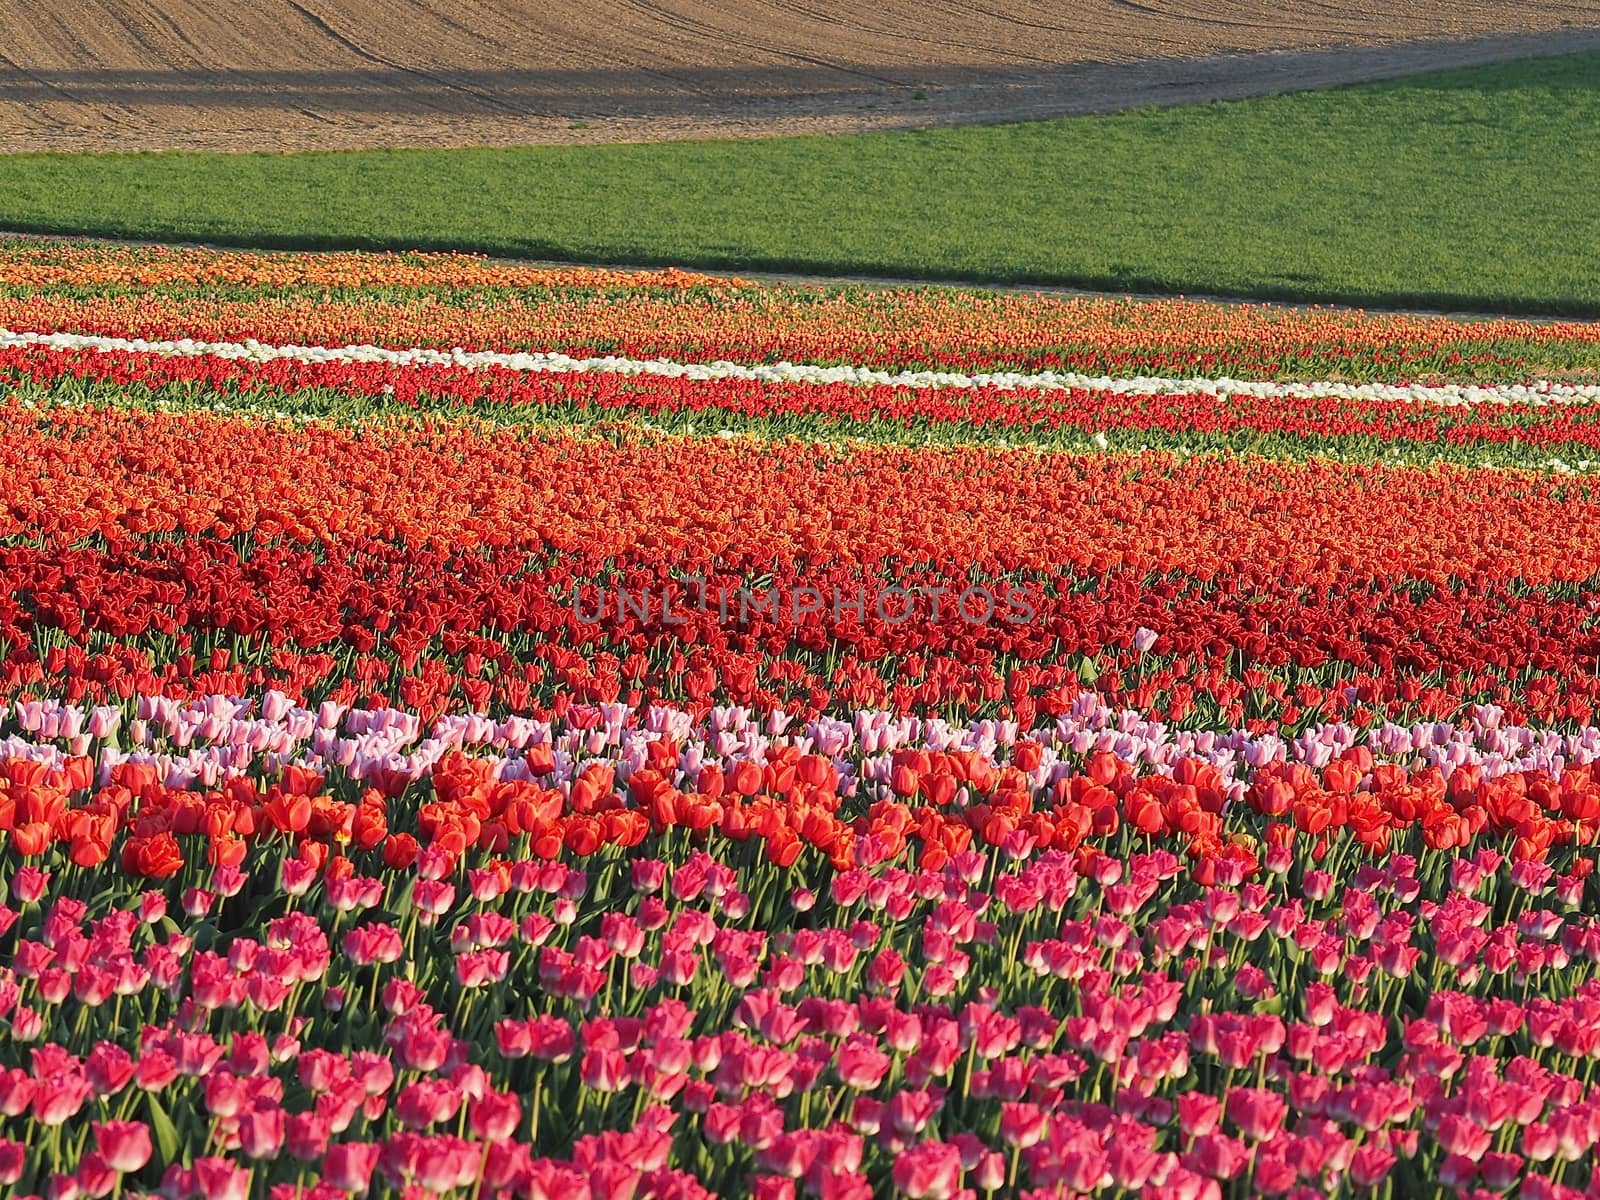 Agriculture - Colorful blooming tulip field in Grevenbroich by Stimmungsbilder